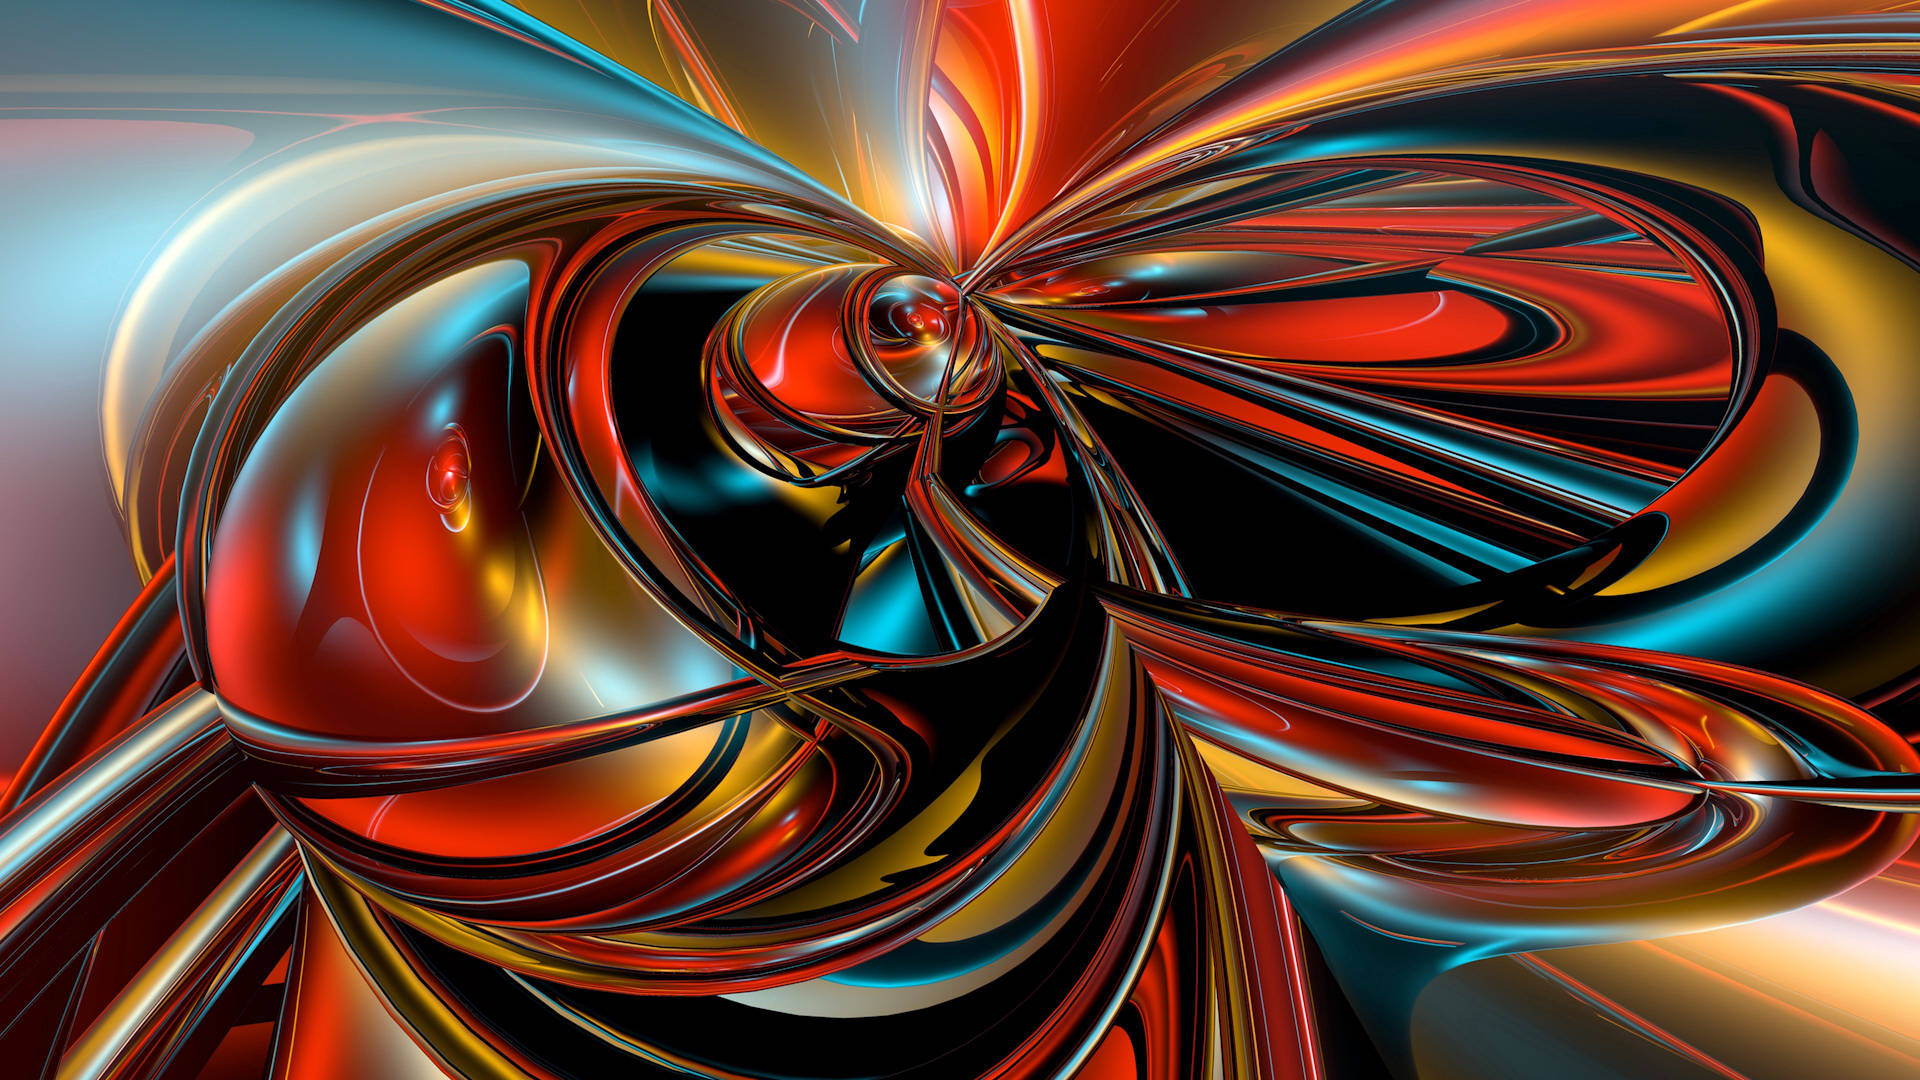 A Psychedelic Abstract Artwork In Vibrant 3d Color